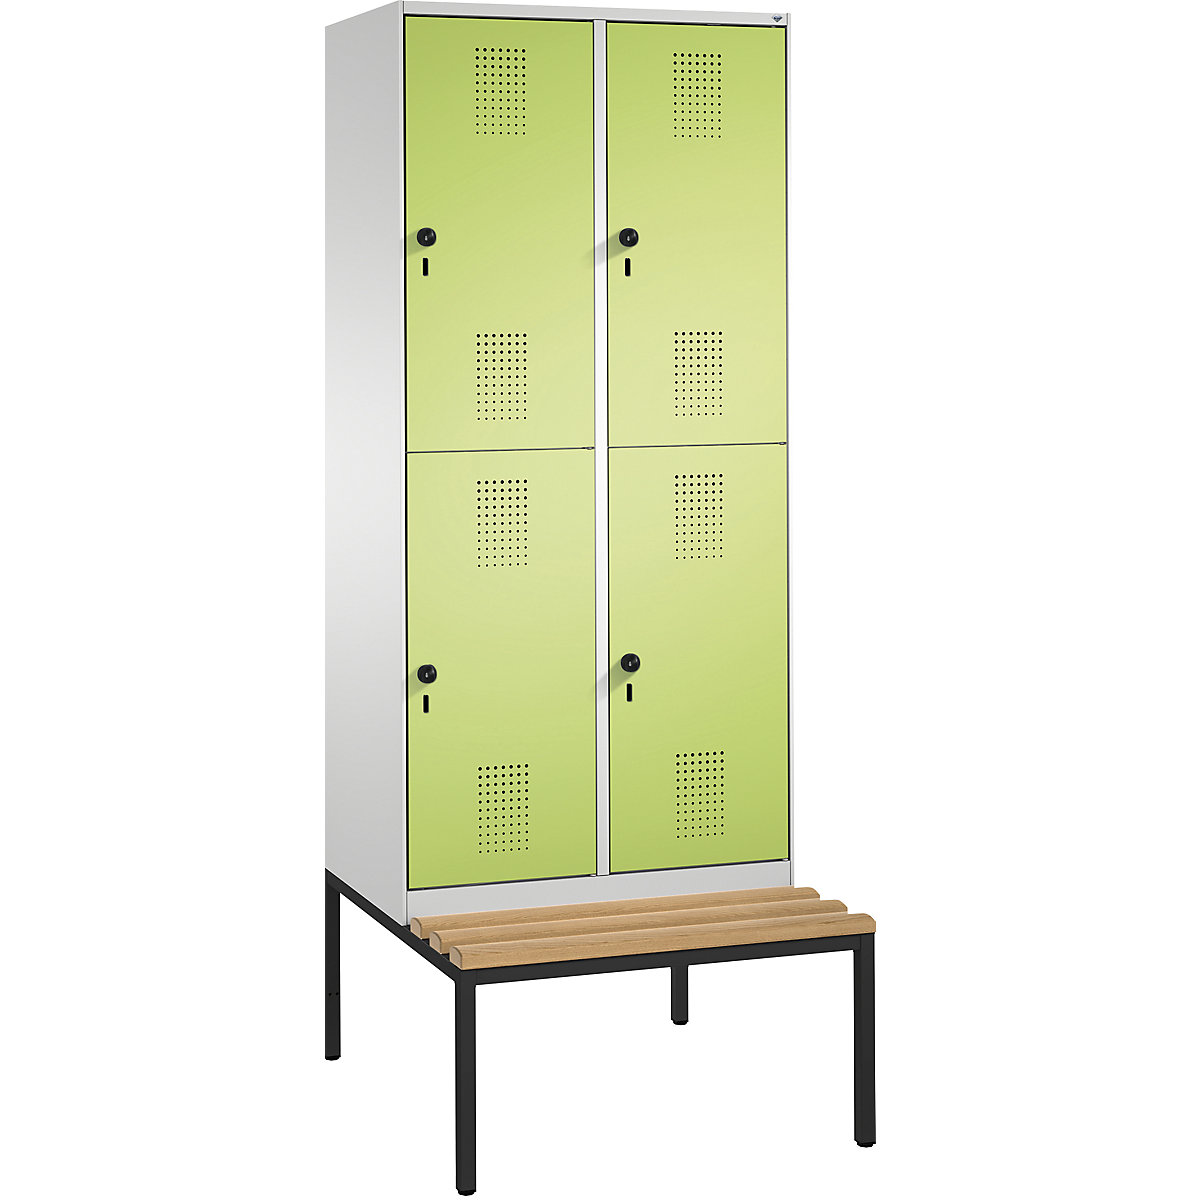 EVOLO cloakroom locker, double tier, with bench – C+P, 2 compartments, 2 shelf compartments each, compartment width 400 mm, light grey / viridian green-14